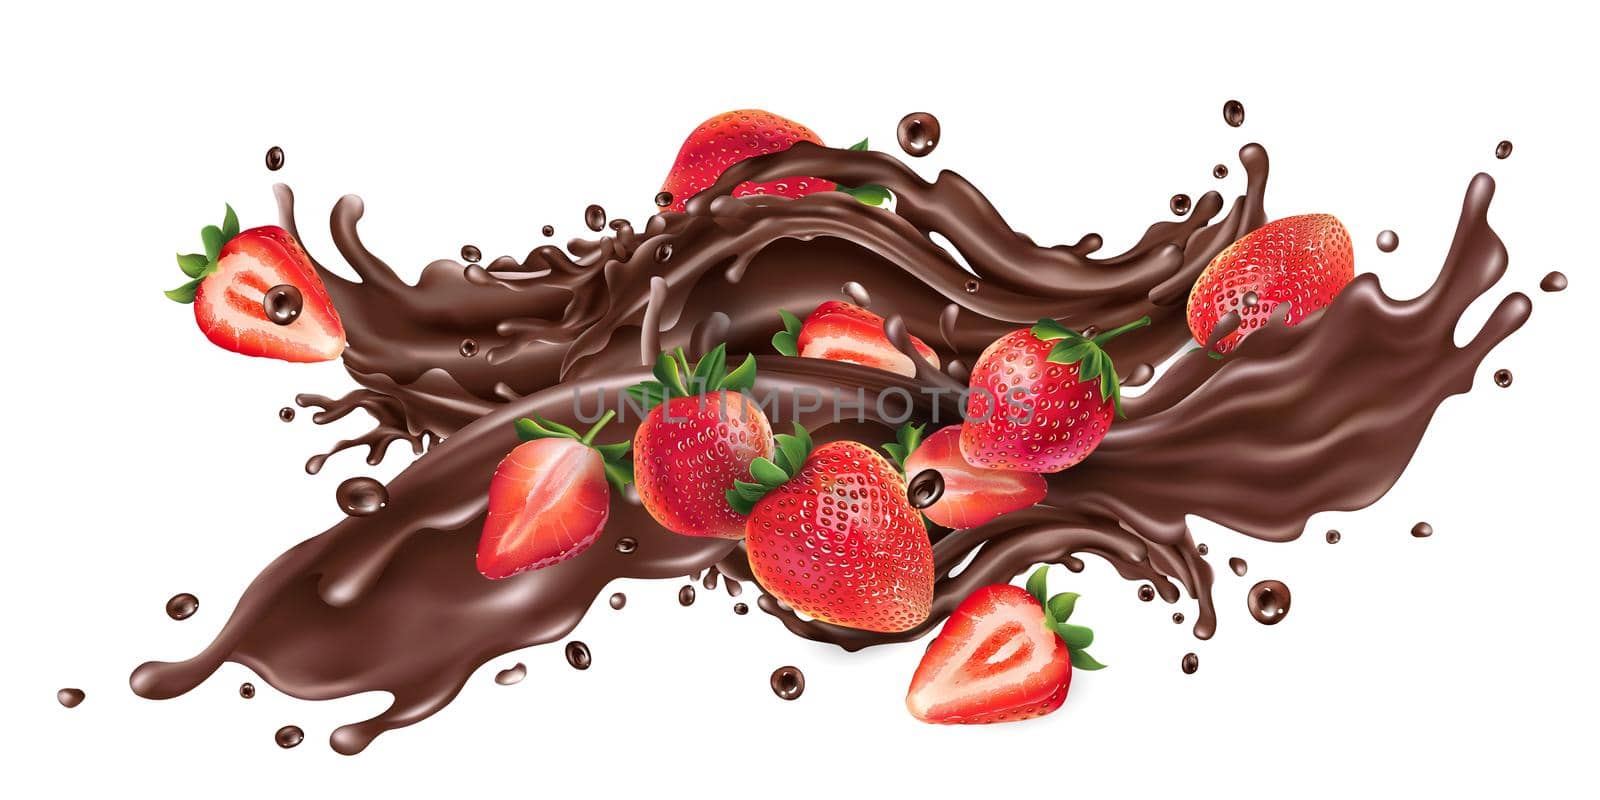 Whole and sliced strawberries and a splash of liquid chocolate on a white background. Realistic style illustration.